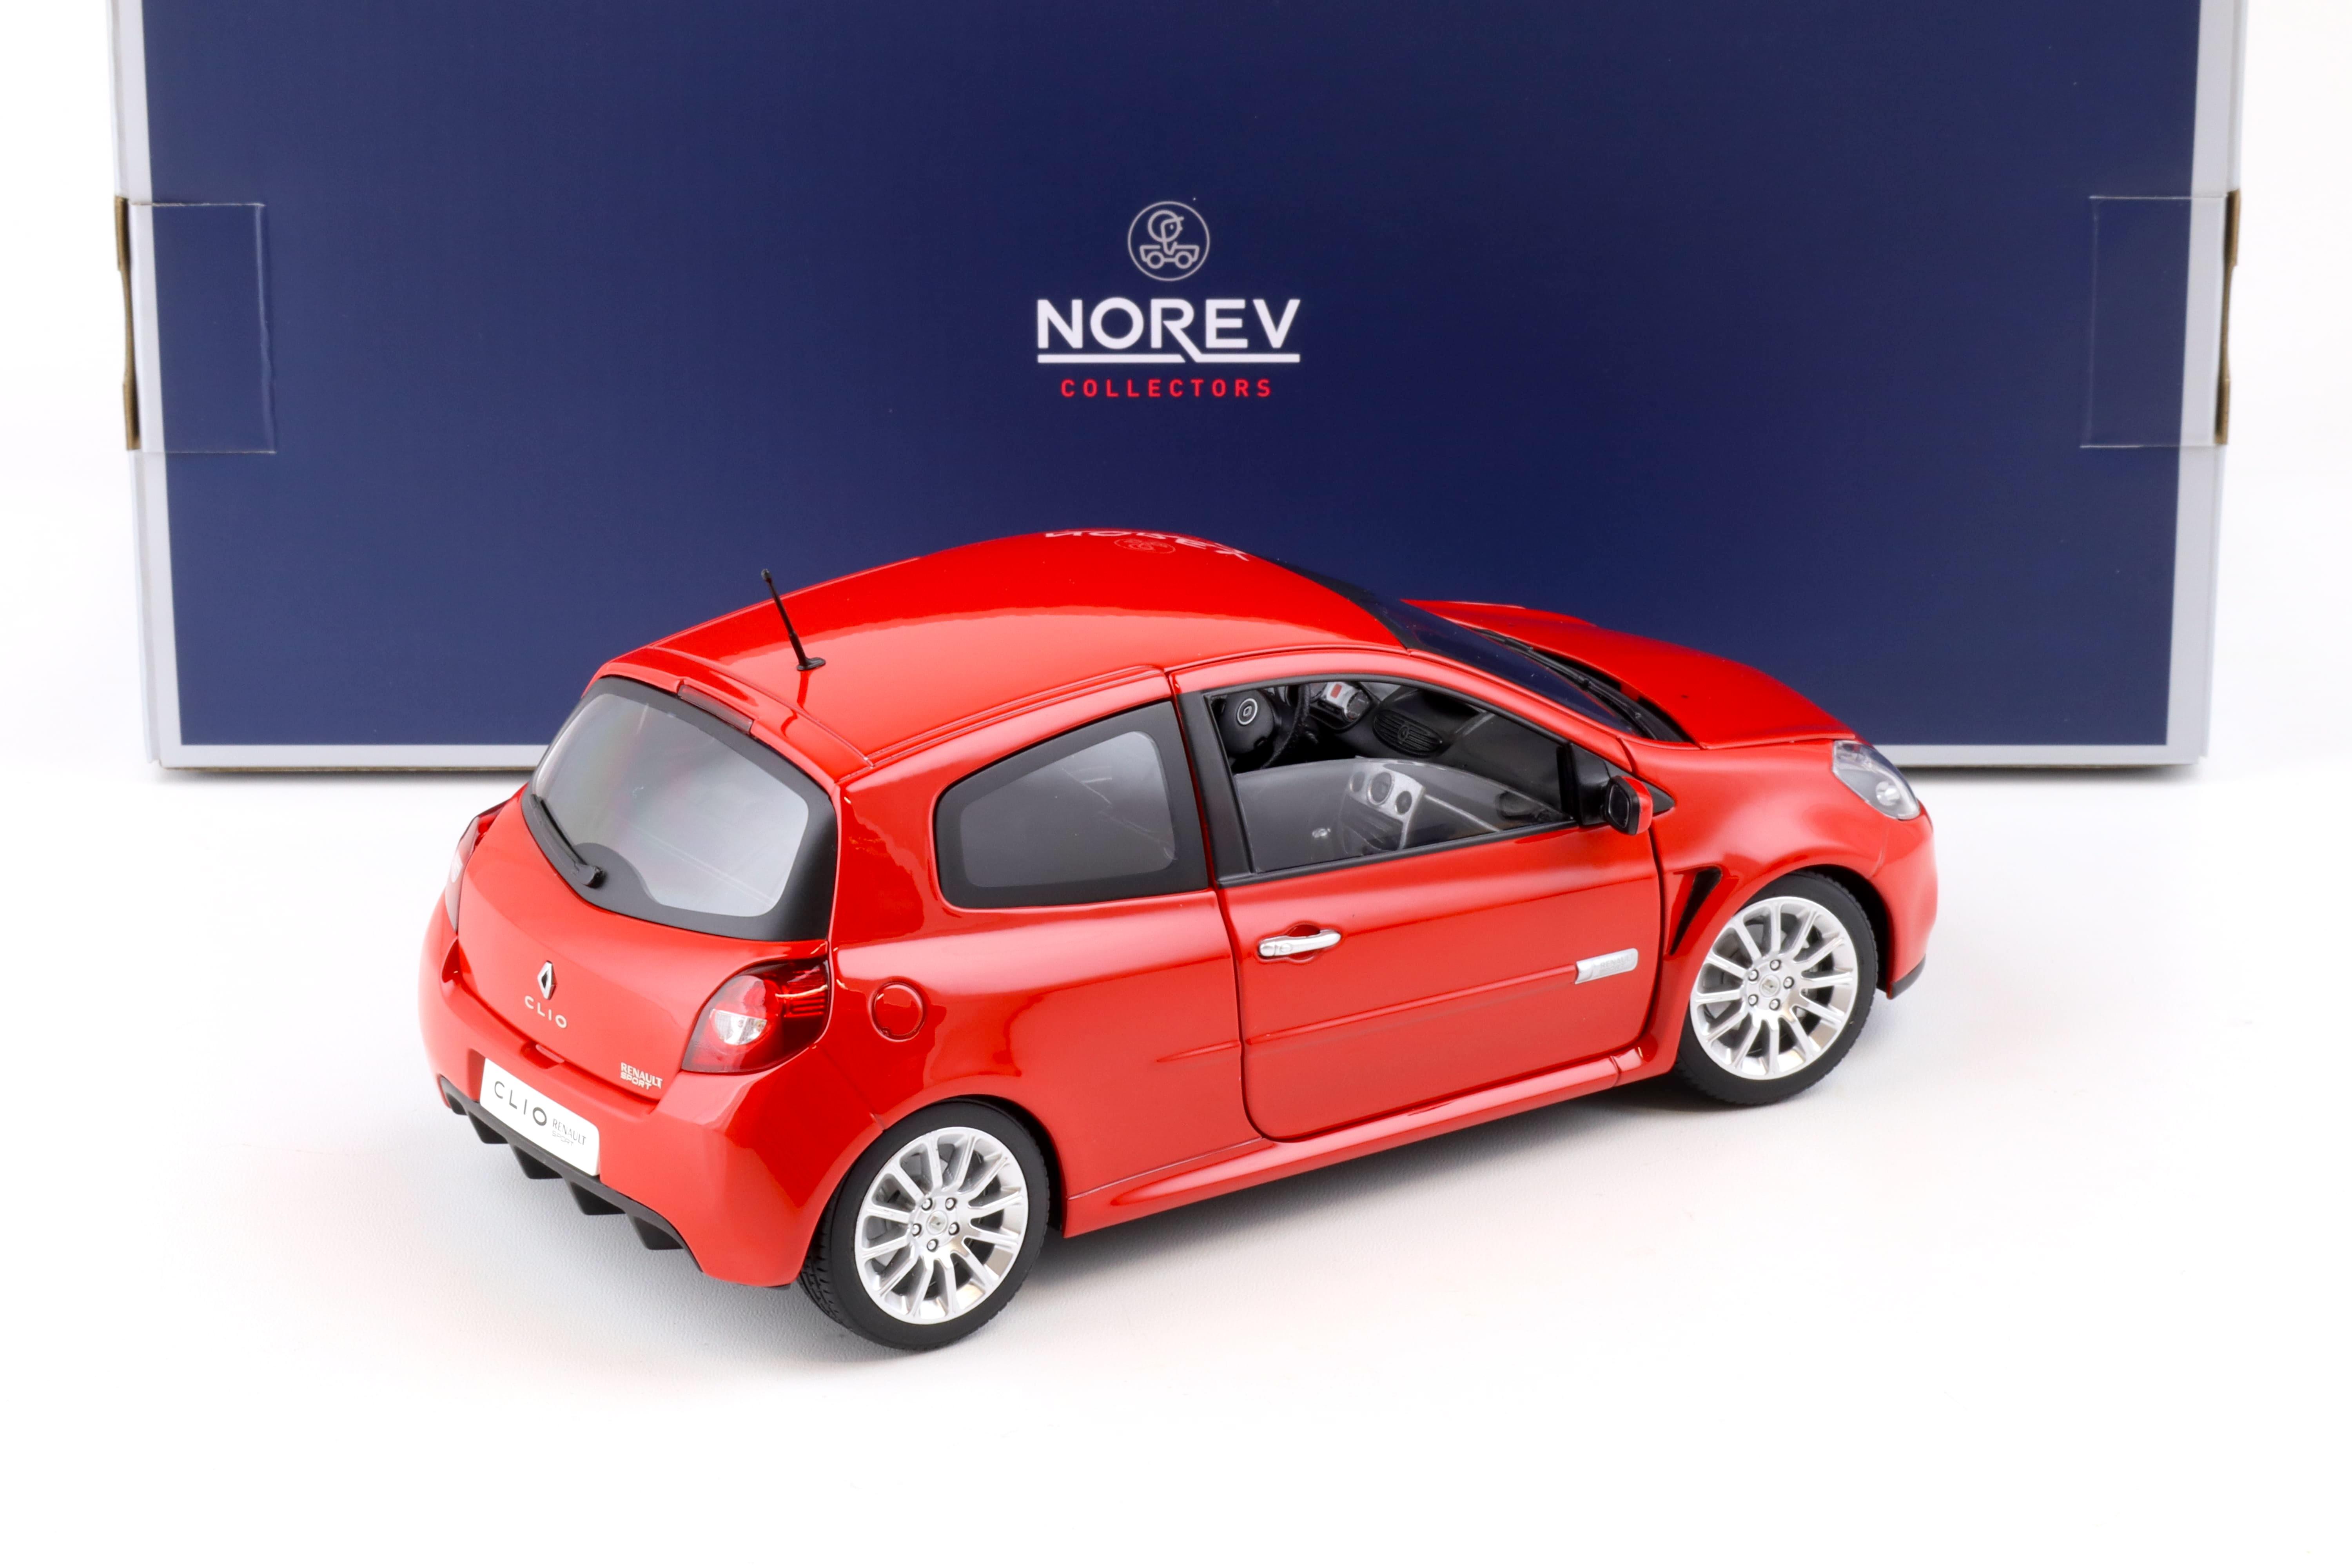 1:18 Norev Renault Clio 3 RS 2006 Toro red